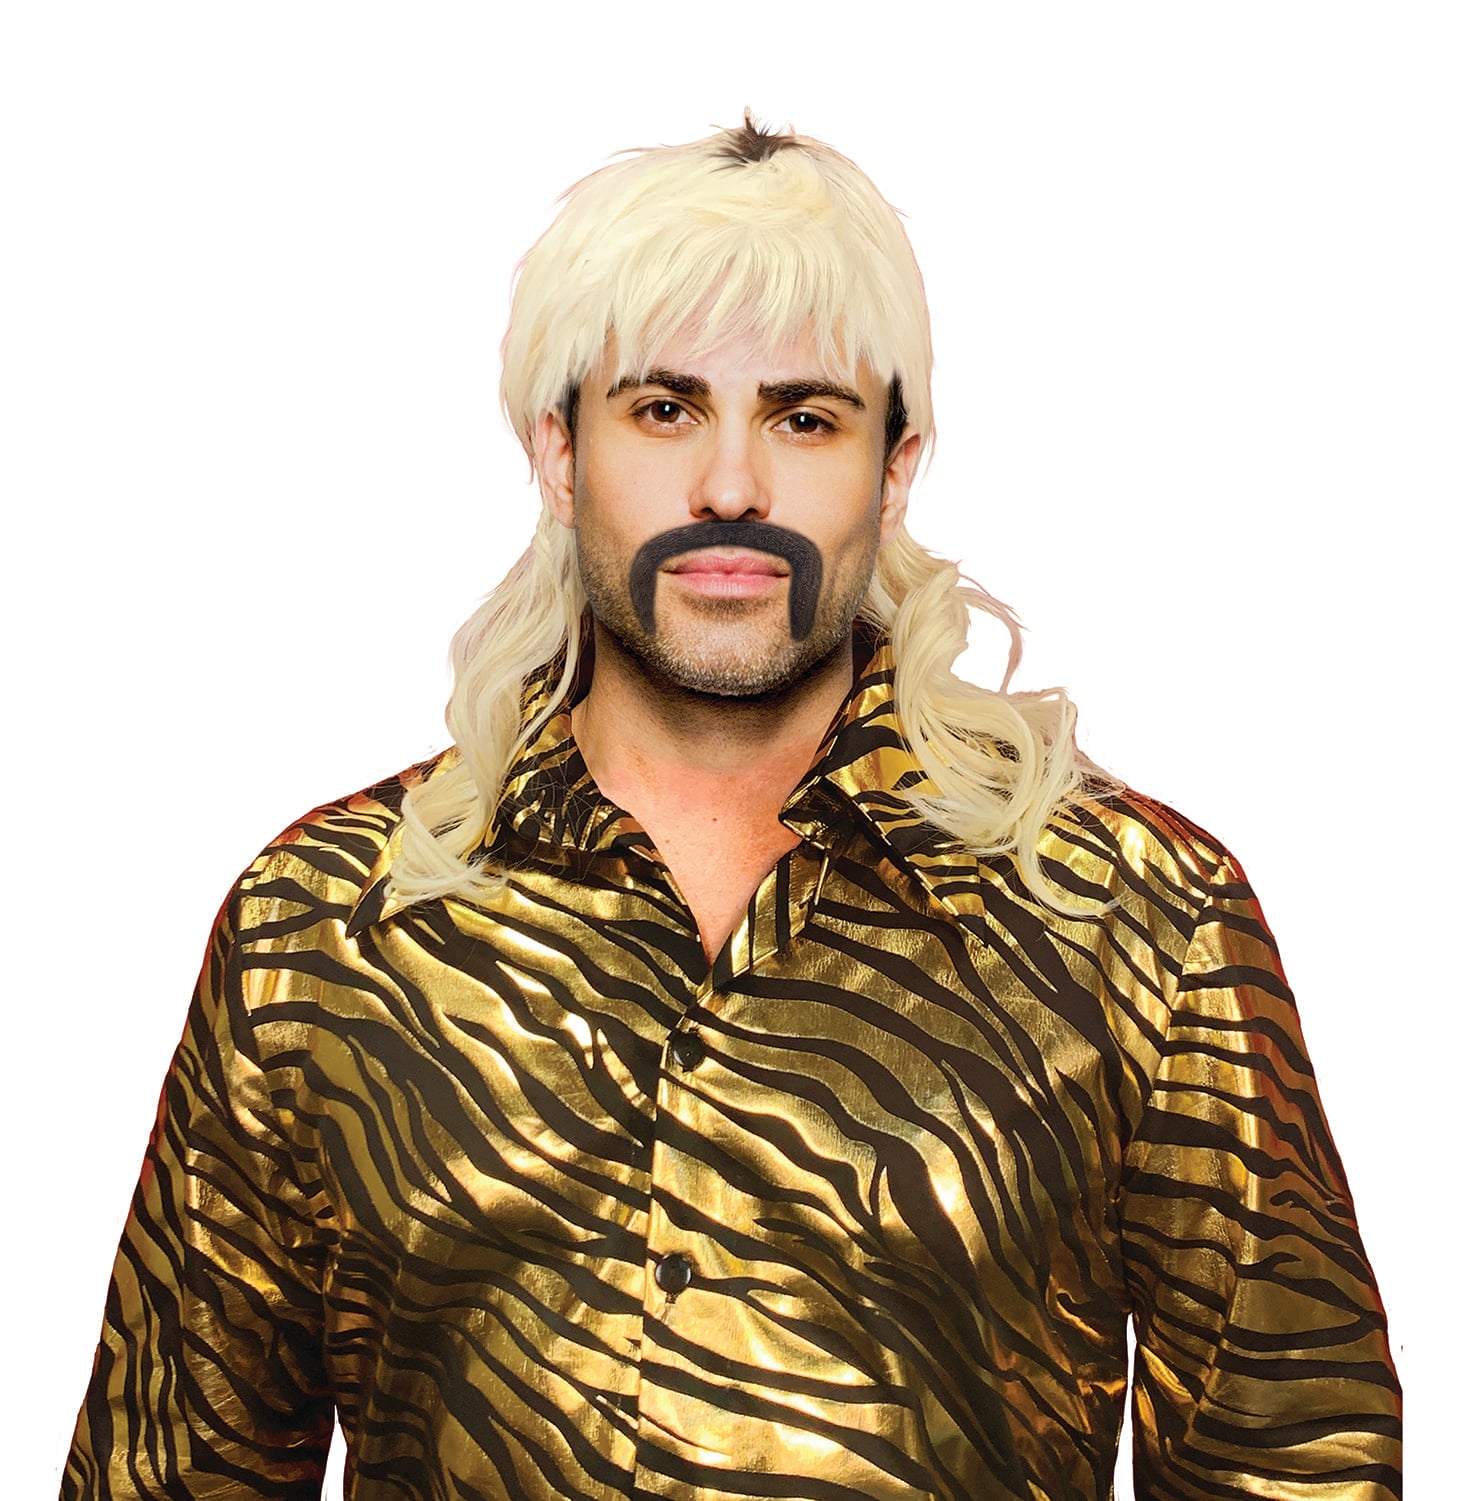 King of Tigers Cosplay Wig | Blonde Mullet Wig and False Mustache Costume Set